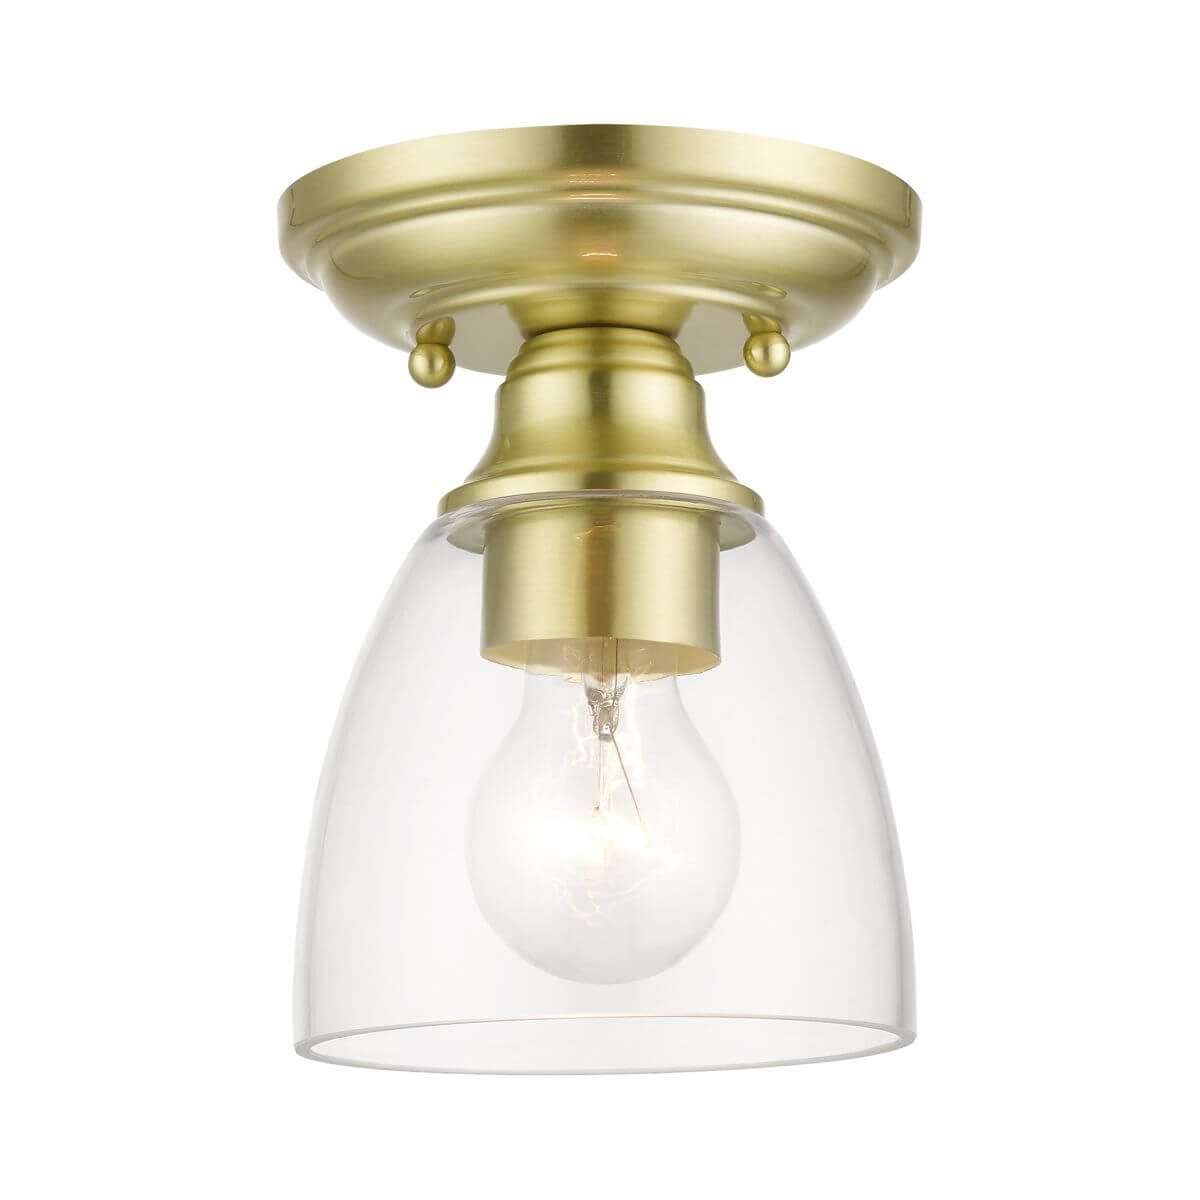 Livex 46331-12 Montgomery 1 Light 5 inch Petite Semi-Flush Mount in Satin Brass with Hand Blown Clear Glass